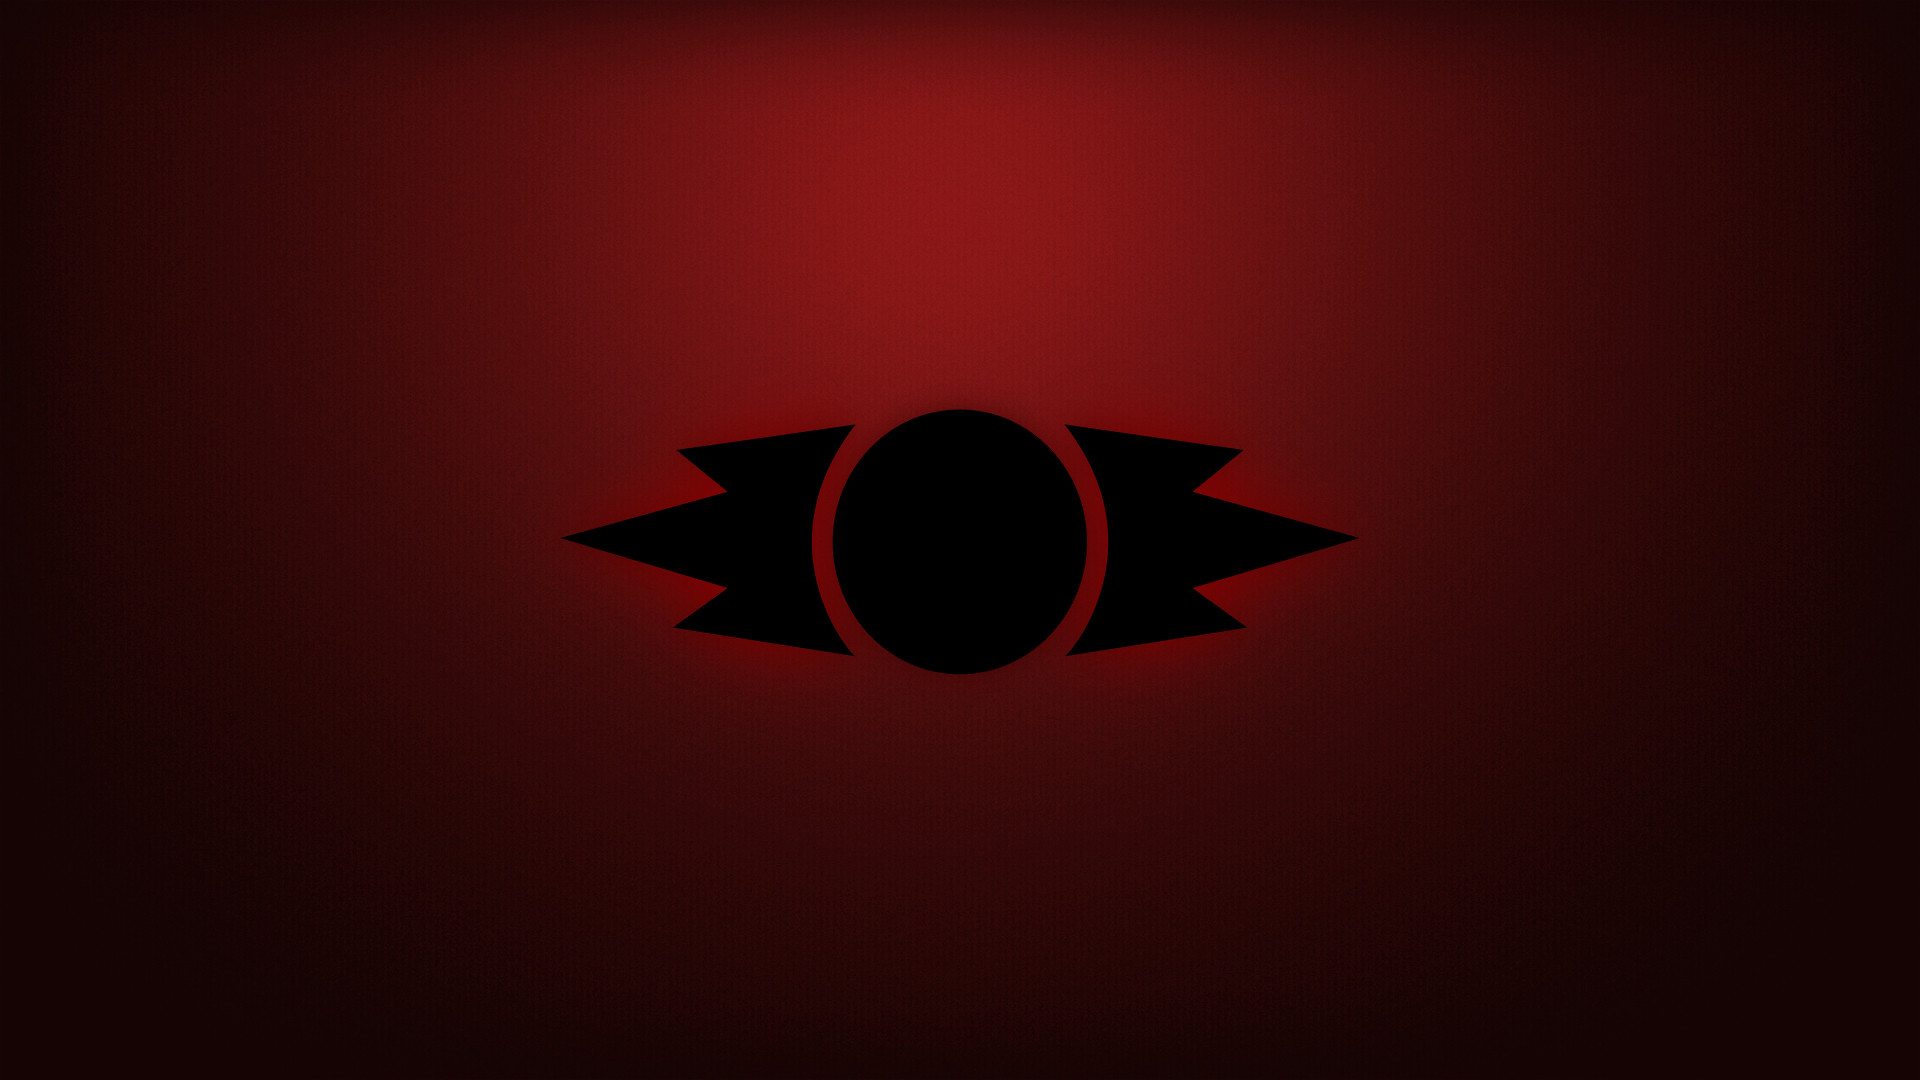 Sith Logo Wallpapers Pictures 1920x1080